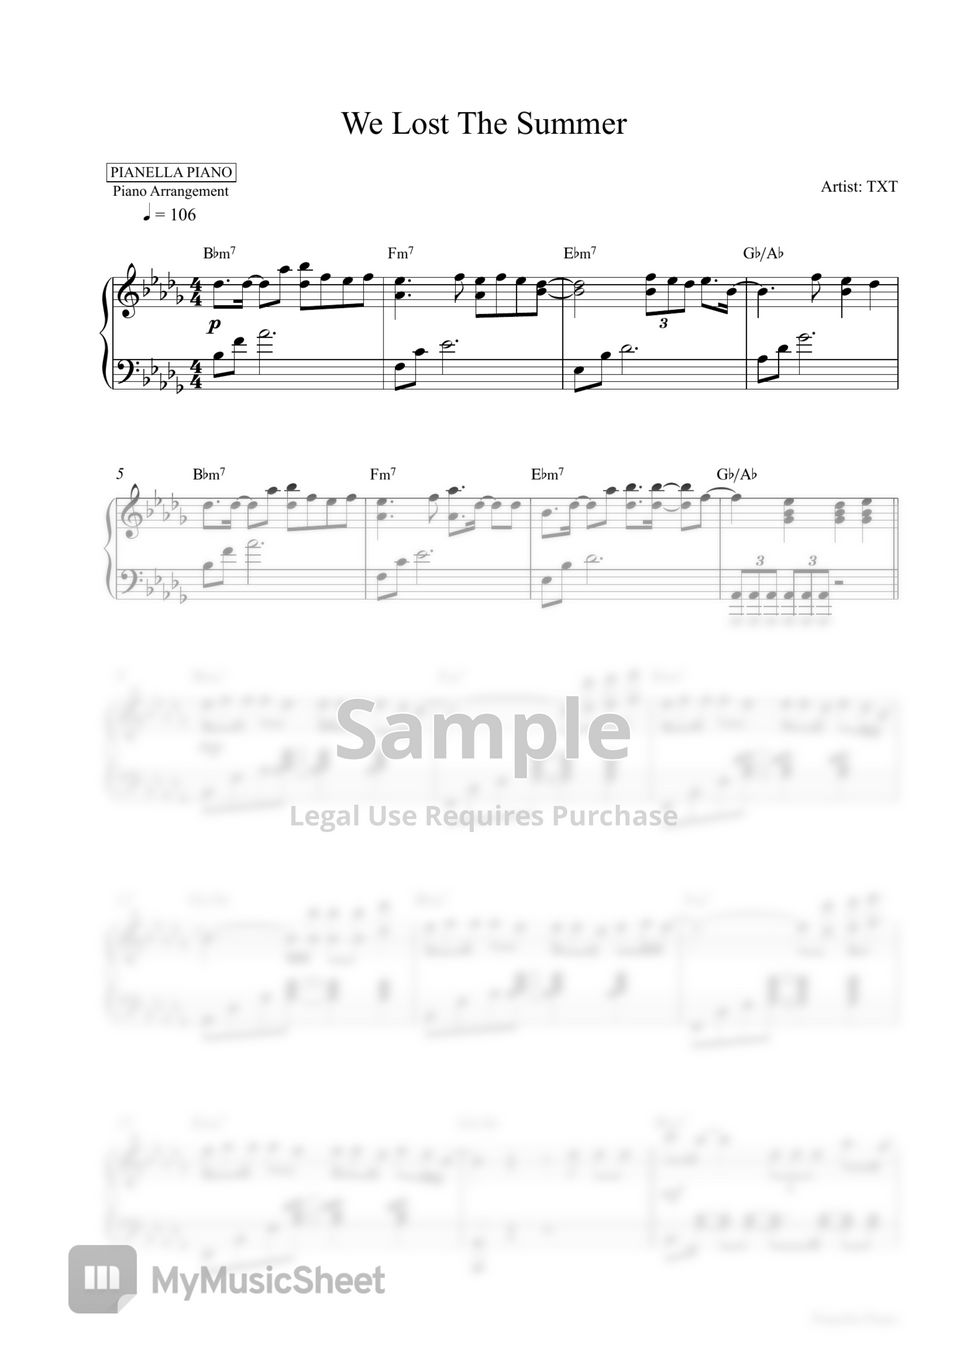 TXT - We Lost The Summer (Piano Sheet) by Pianella Piano